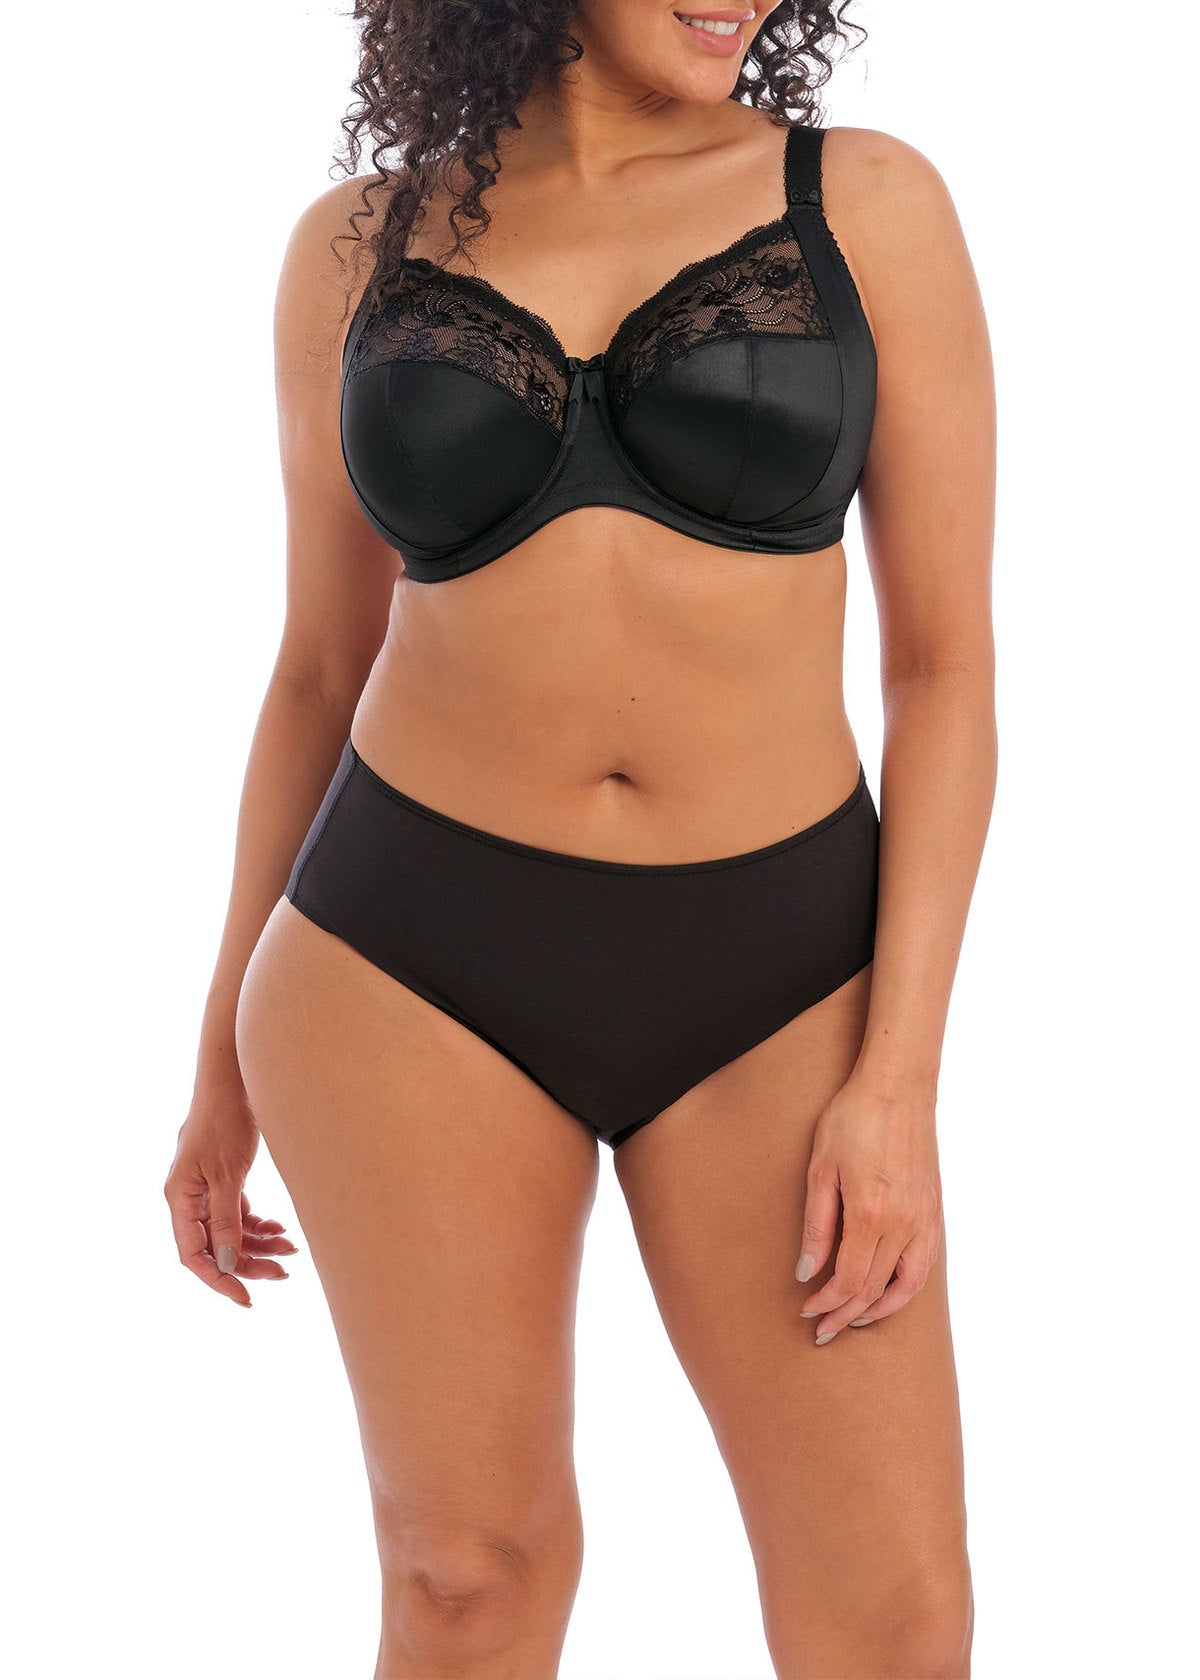 Pretty Things Elomi Morgan Full Cup Support Black Bra - Underwear Specialists 